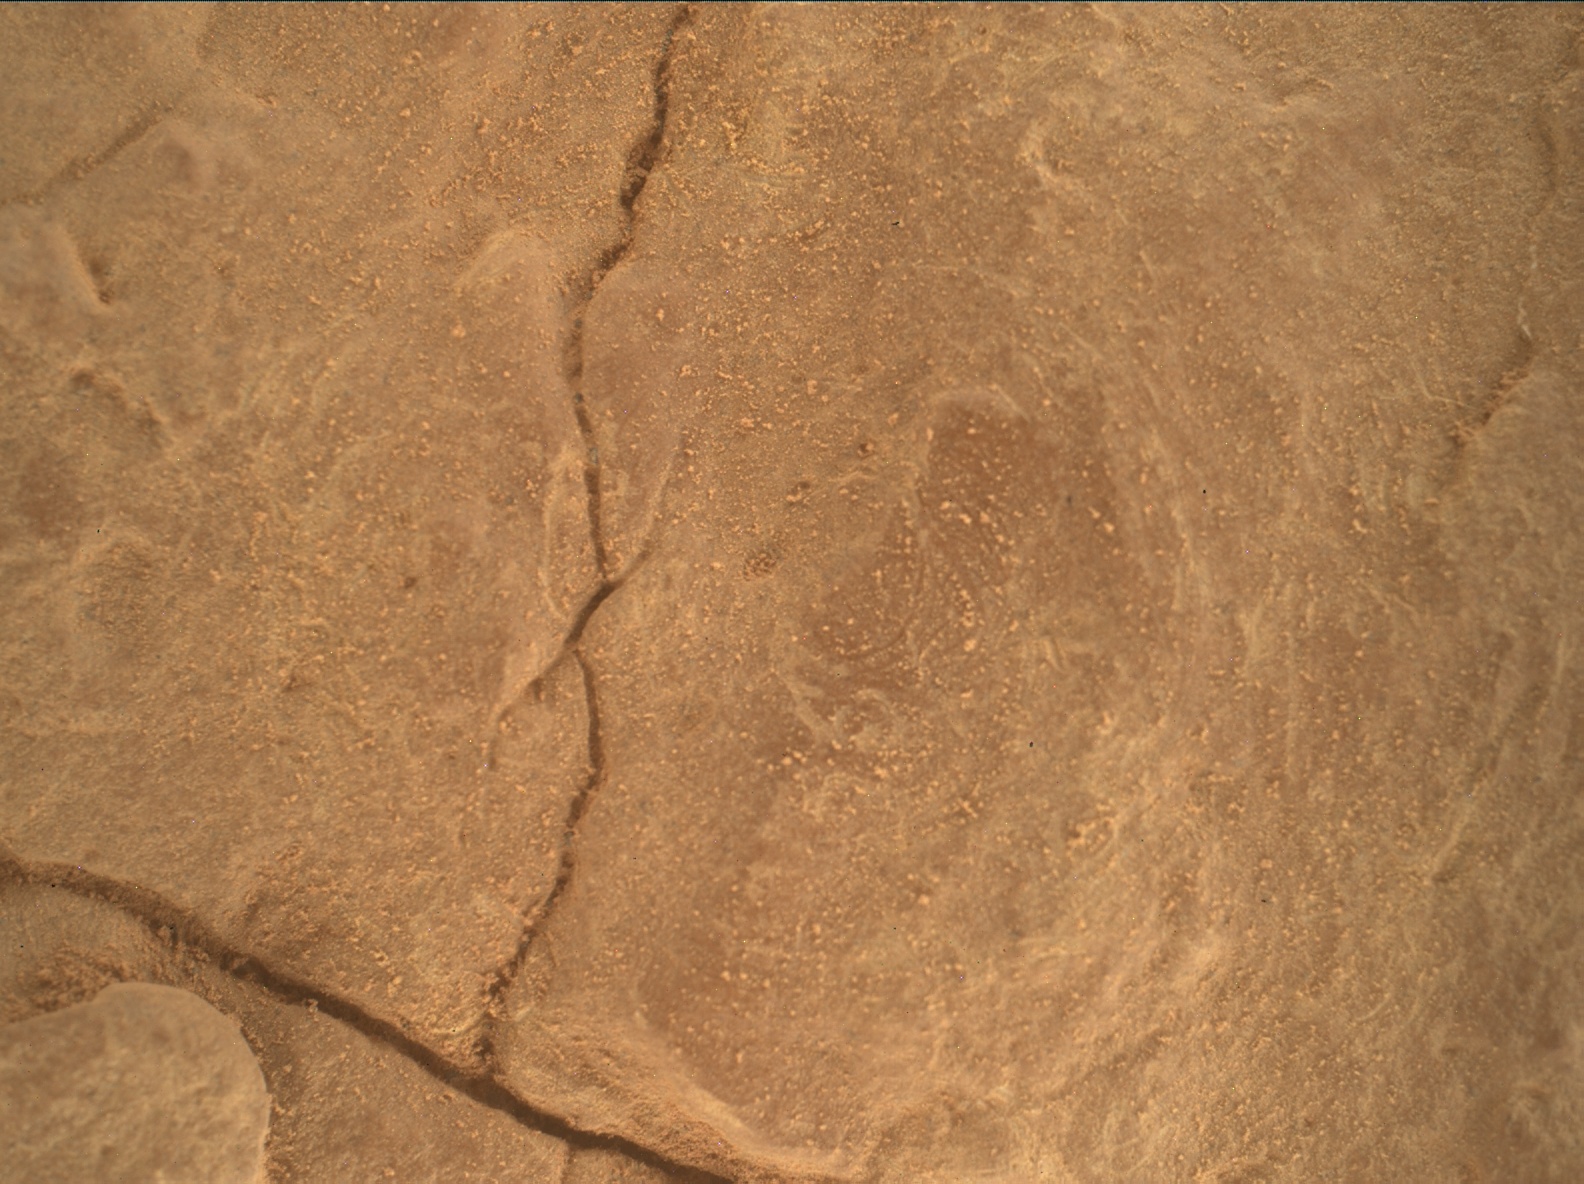 Nasa's Mars rover Curiosity acquired this image using its Mars Hand Lens Imager (MAHLI) on Sol 2415